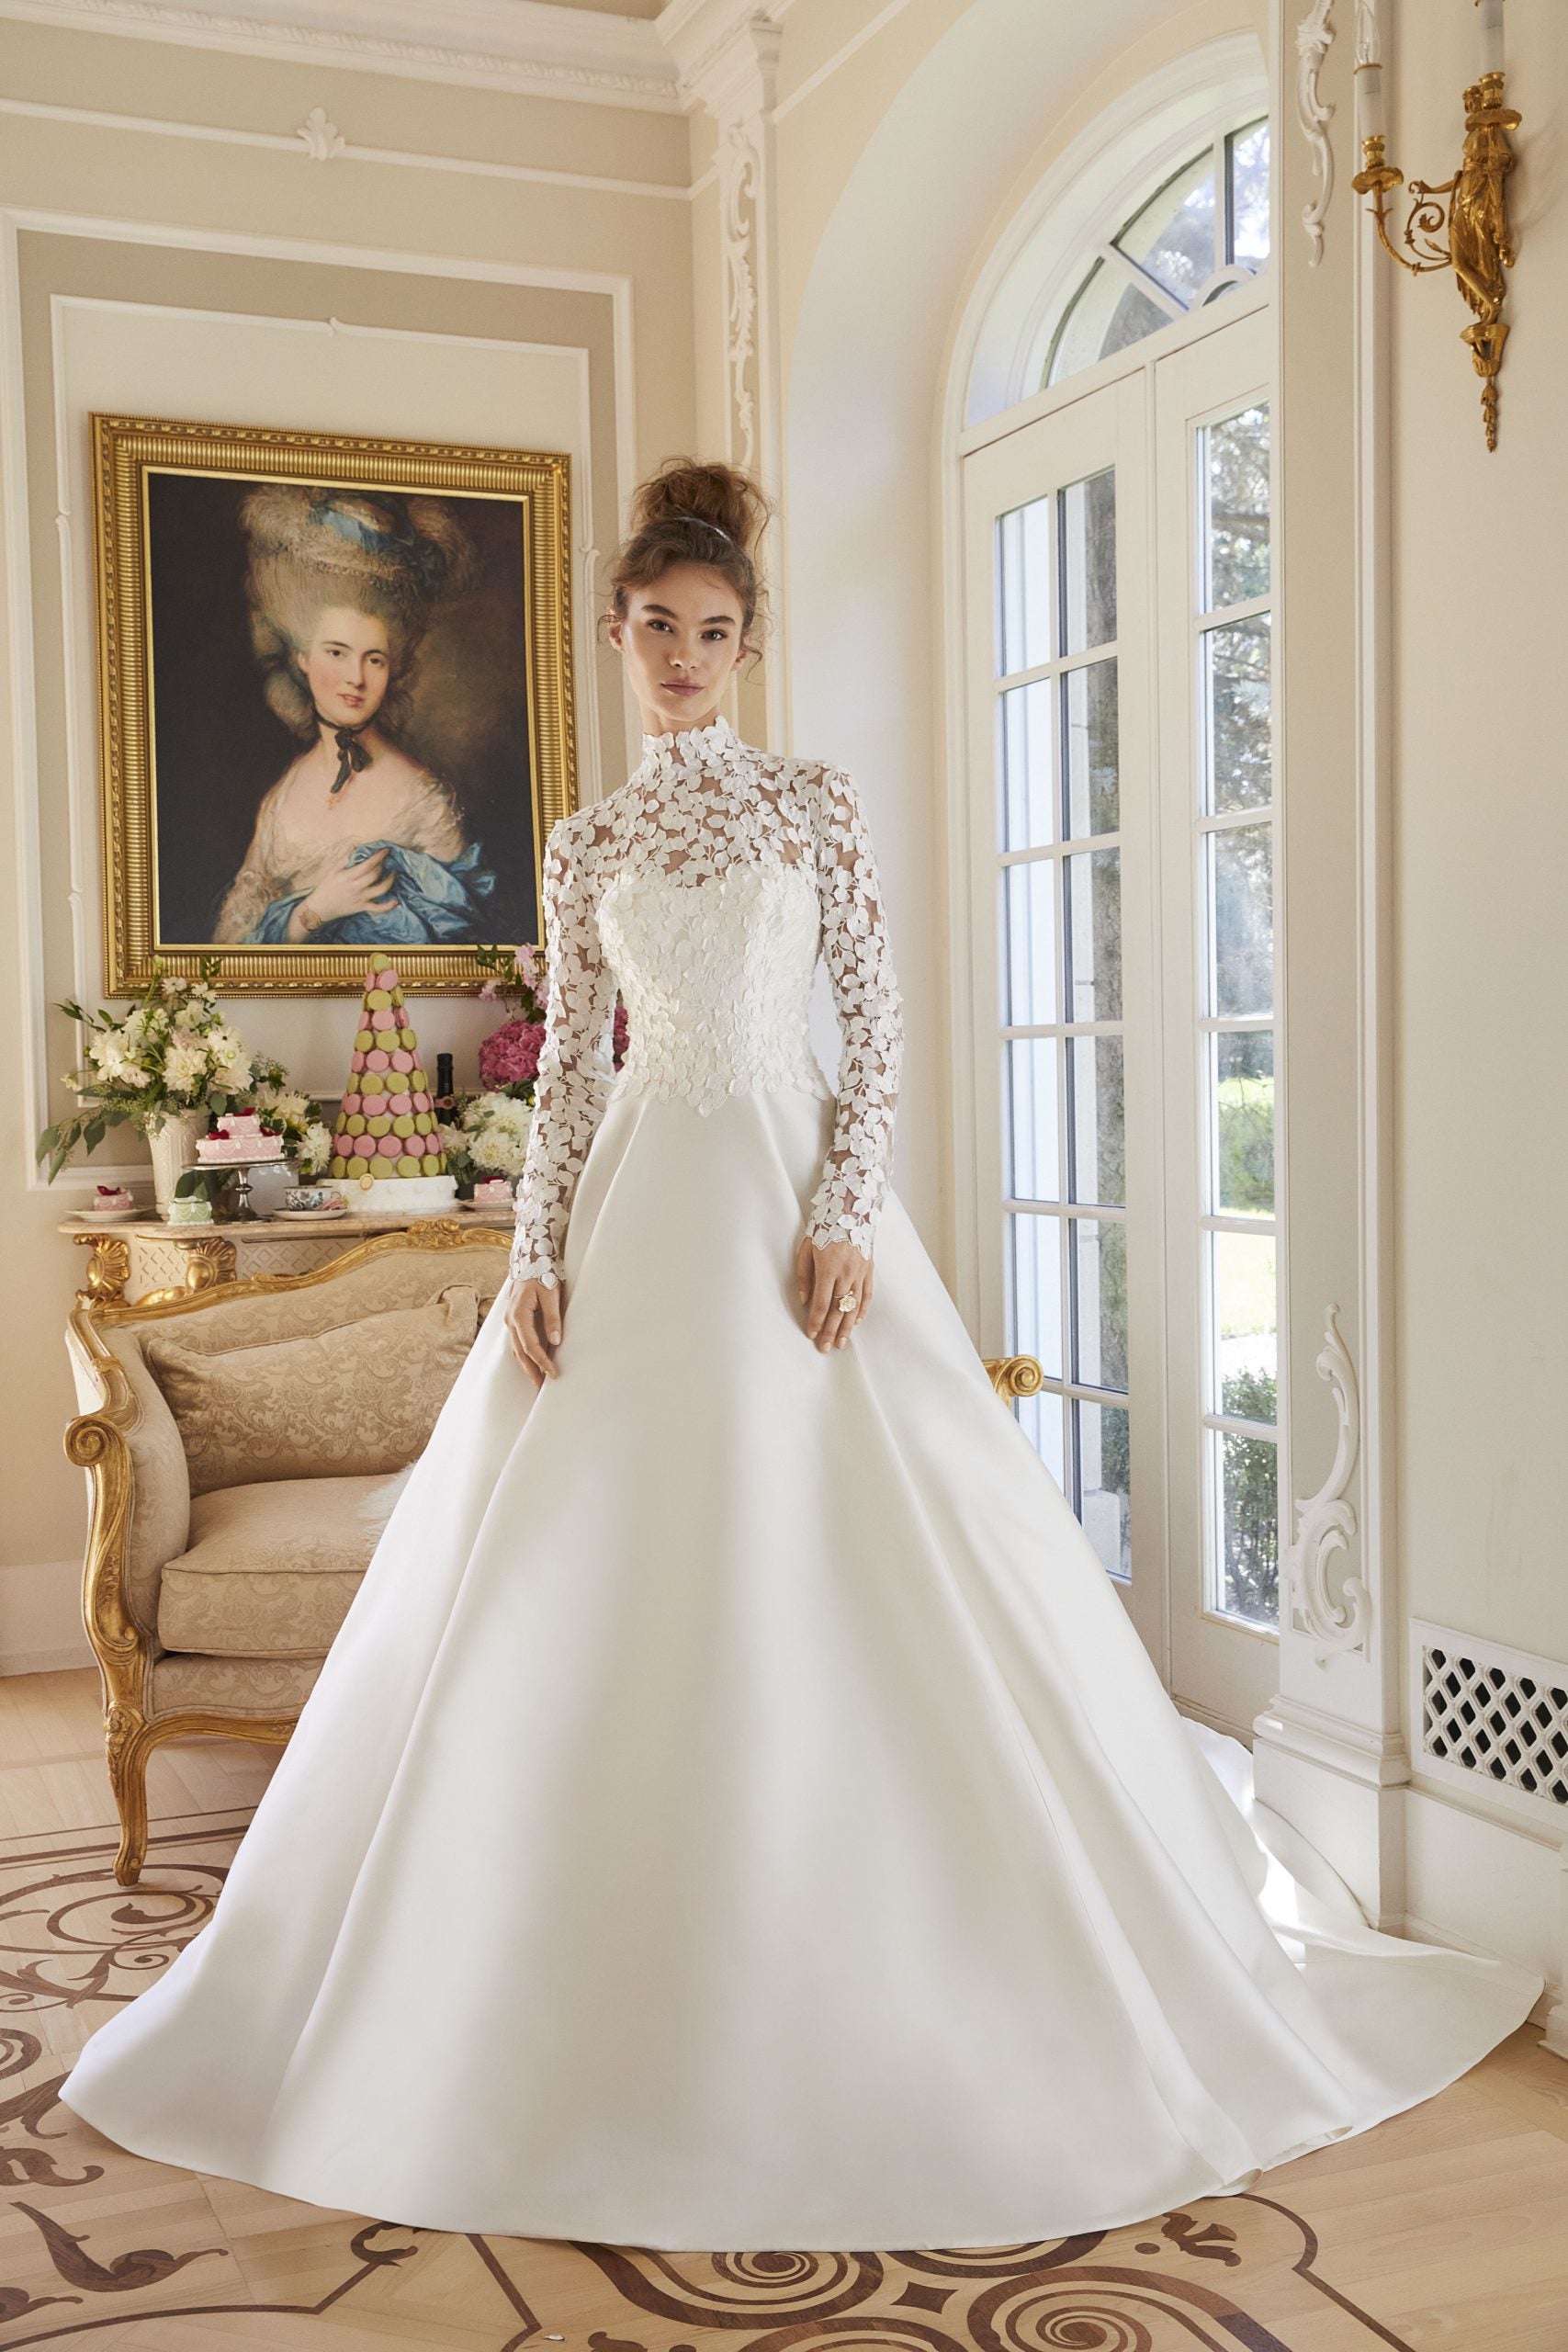 Chic Mikado Ball Gown With Detachable Bolero And Bow by Sareh Nouri - Image 1